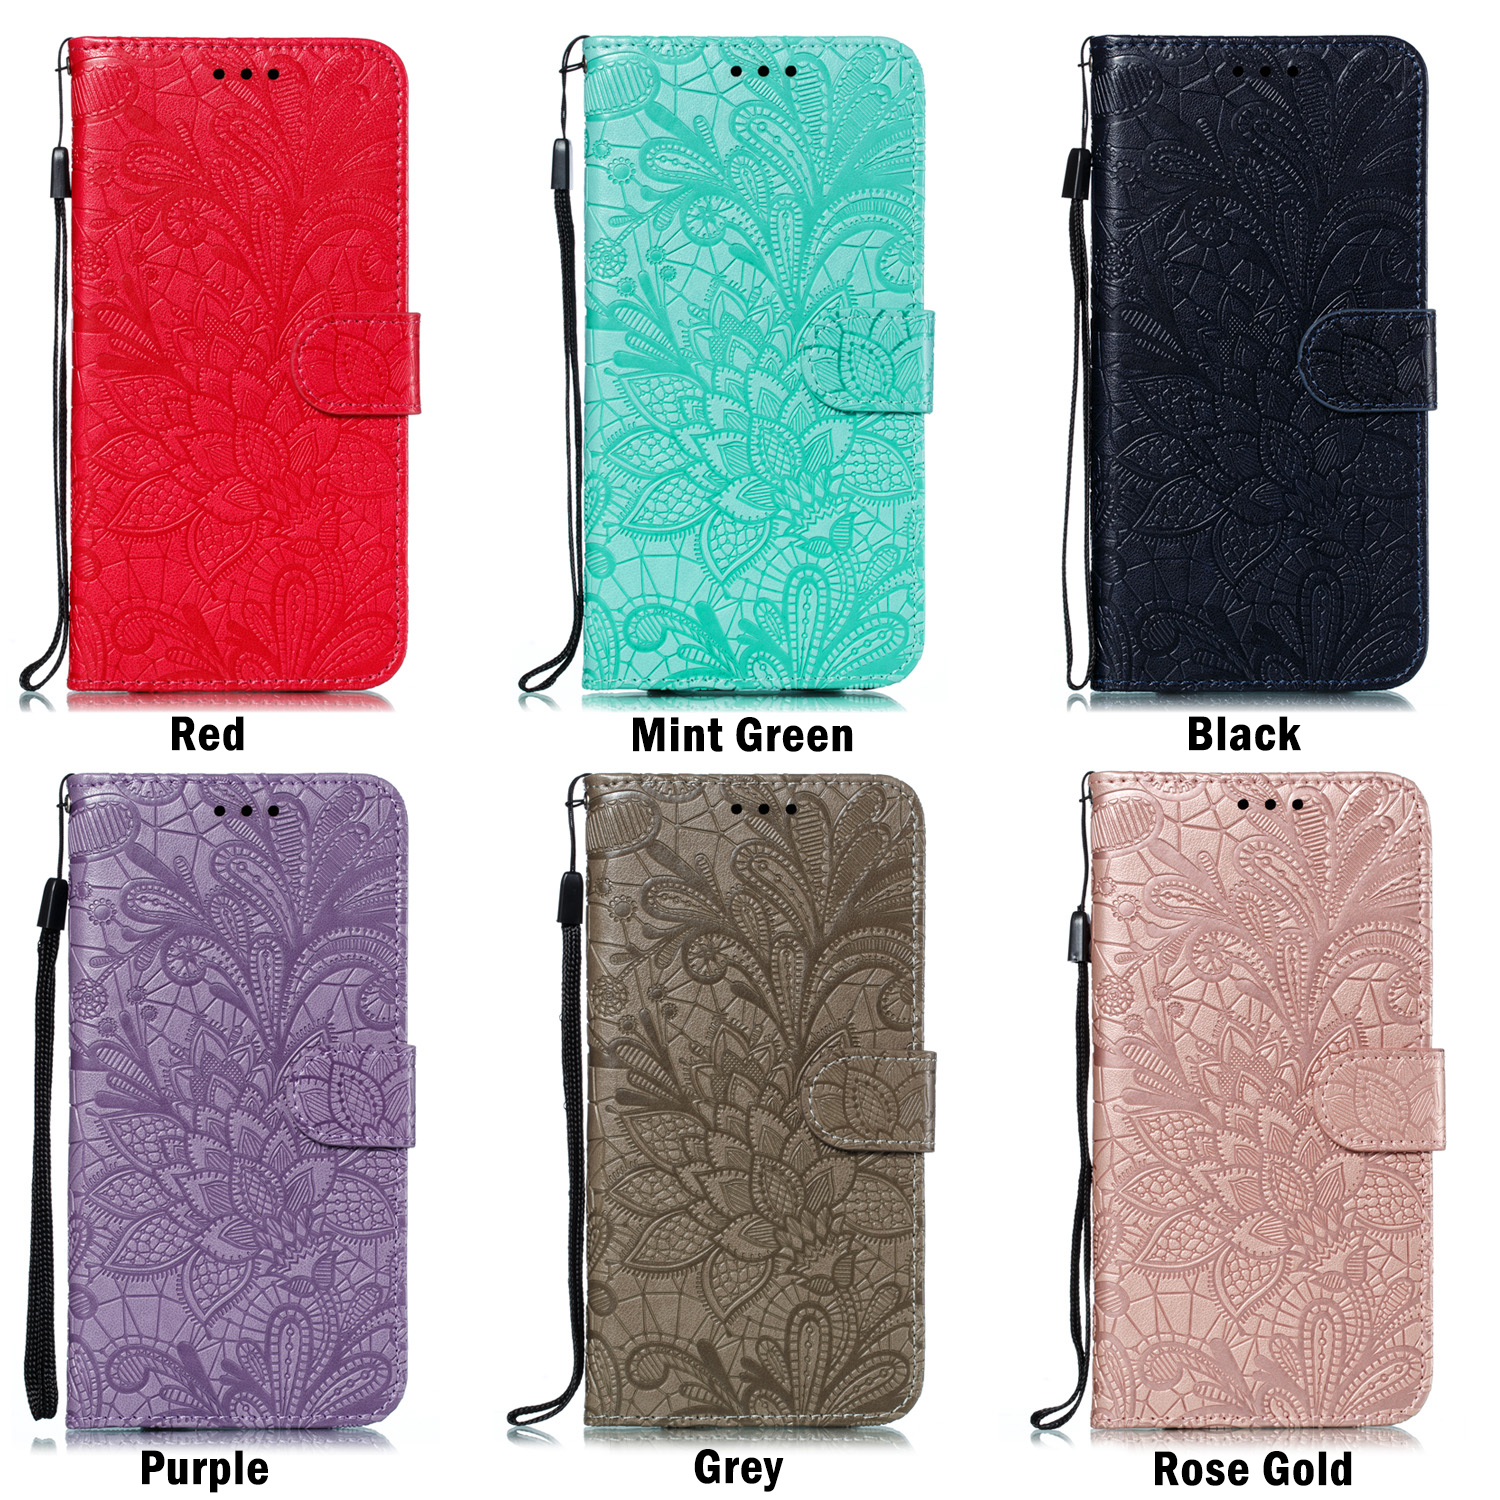 

Wallet Phone Cases for iPhone 13 12 11 Pro Max XR XS X 7 8 Samsung Galaxy S21 S20 Note20 Ultra Noto10 S10 Plus Lace Flower Pattern PU Leather Shockproof Protective Case, Grey